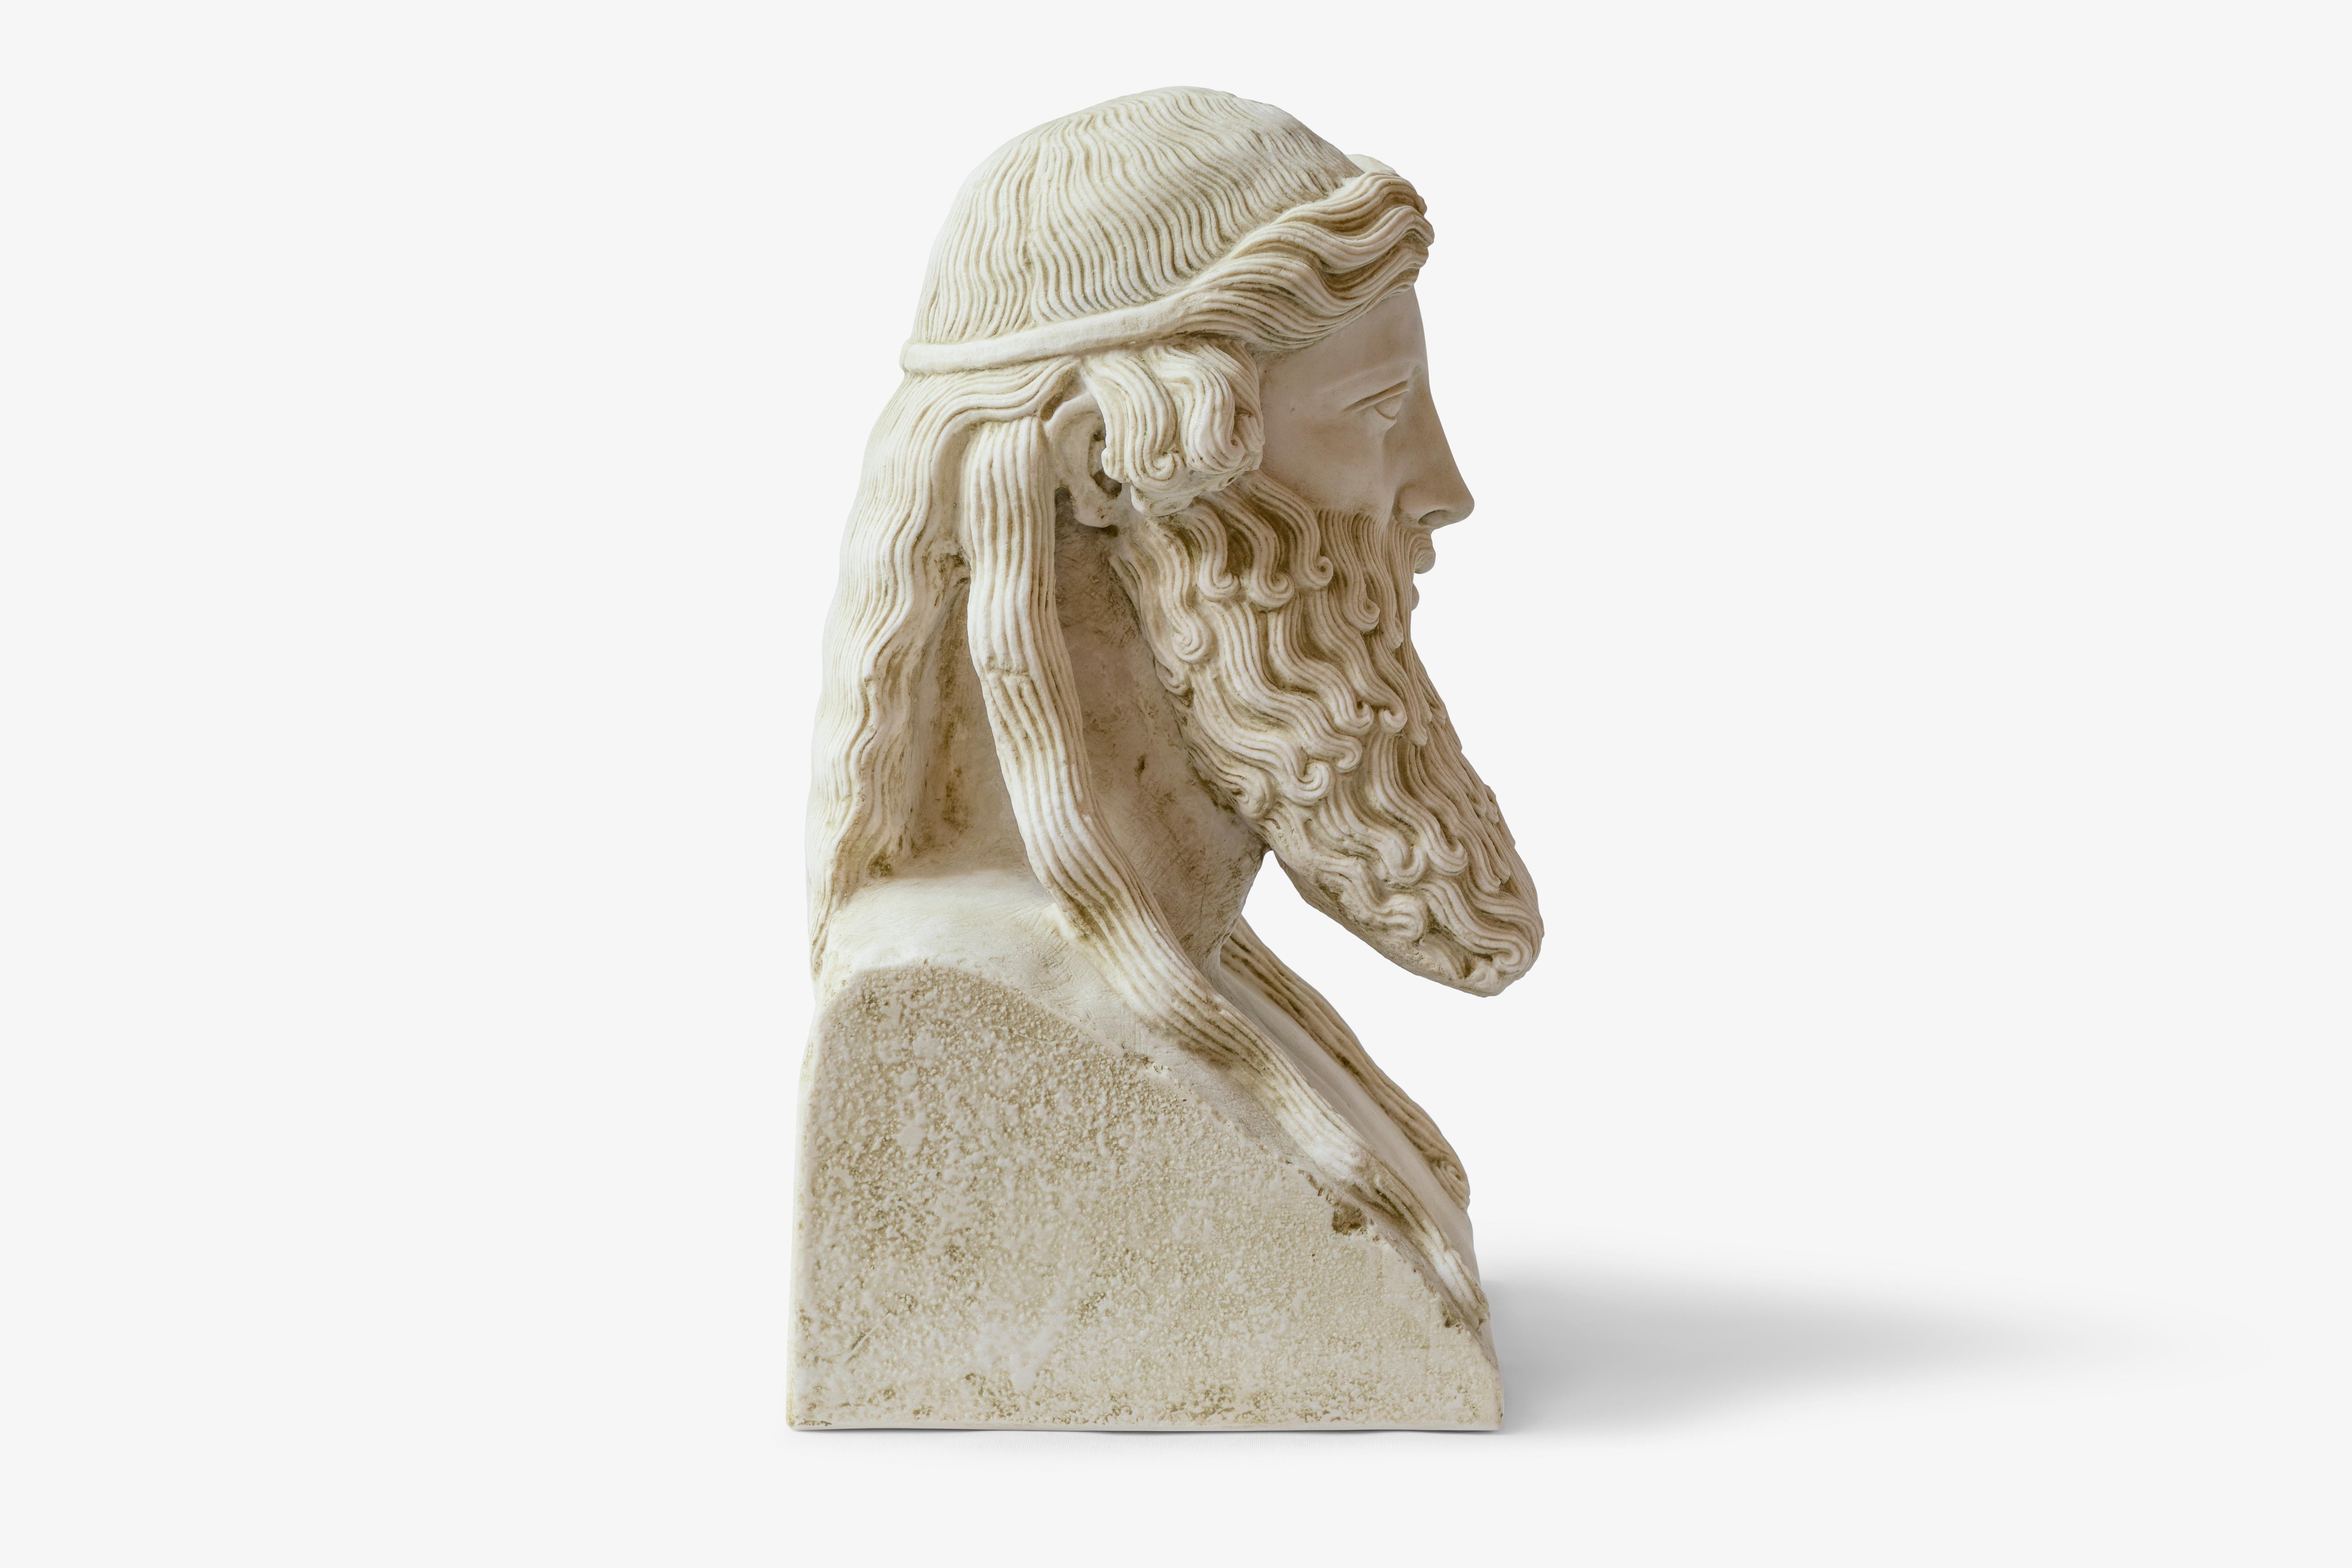 hermes statue for sale